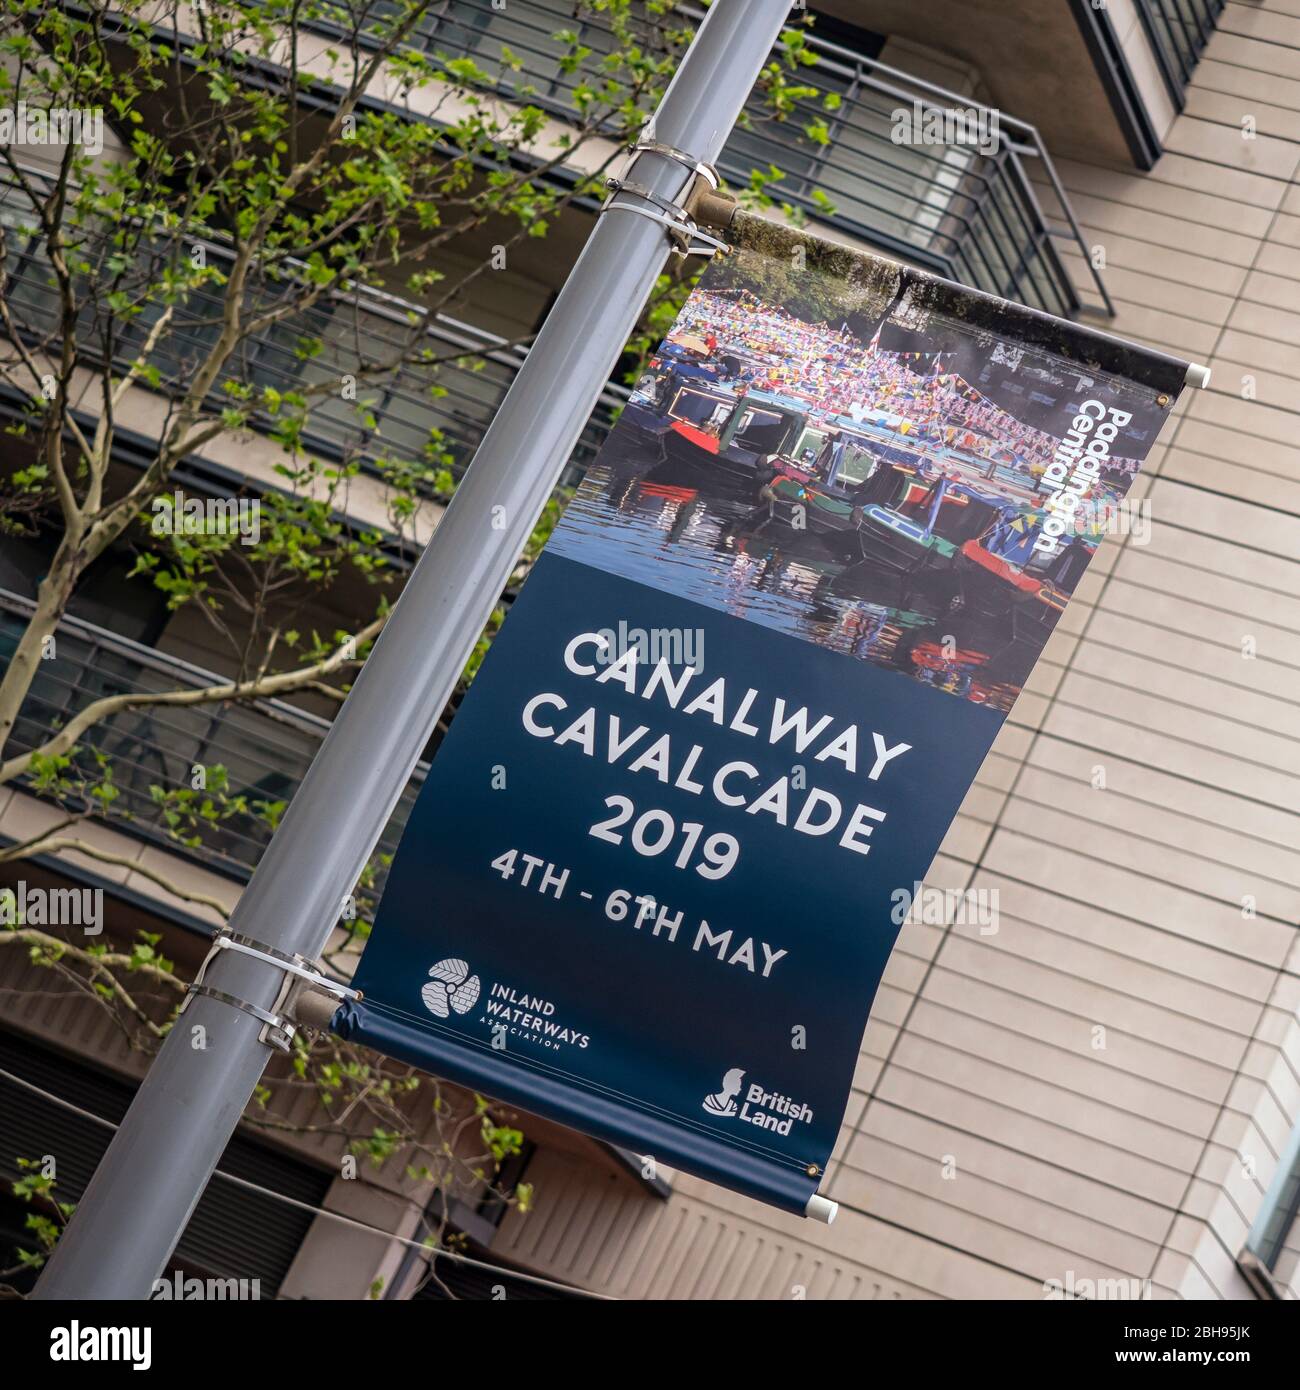 Poster advertising the Canalway Cavalcade Narrowboat gathering Stock Photo